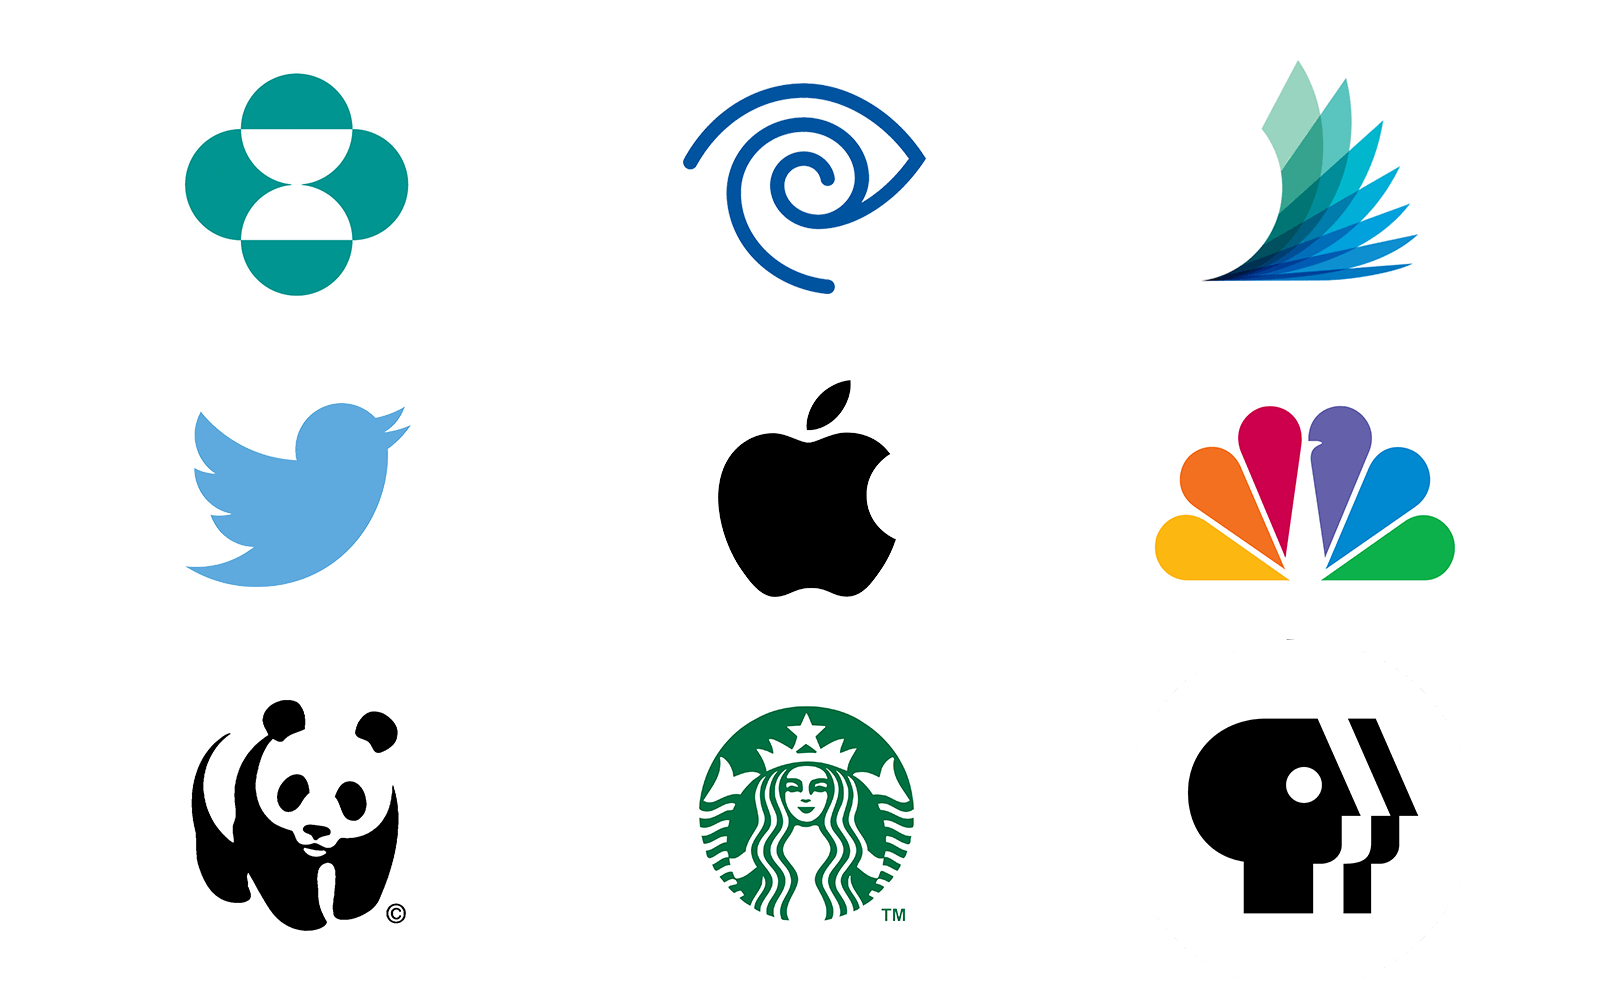 Pictoral Logo - 5 Types of Logos to Consider For Your Brand